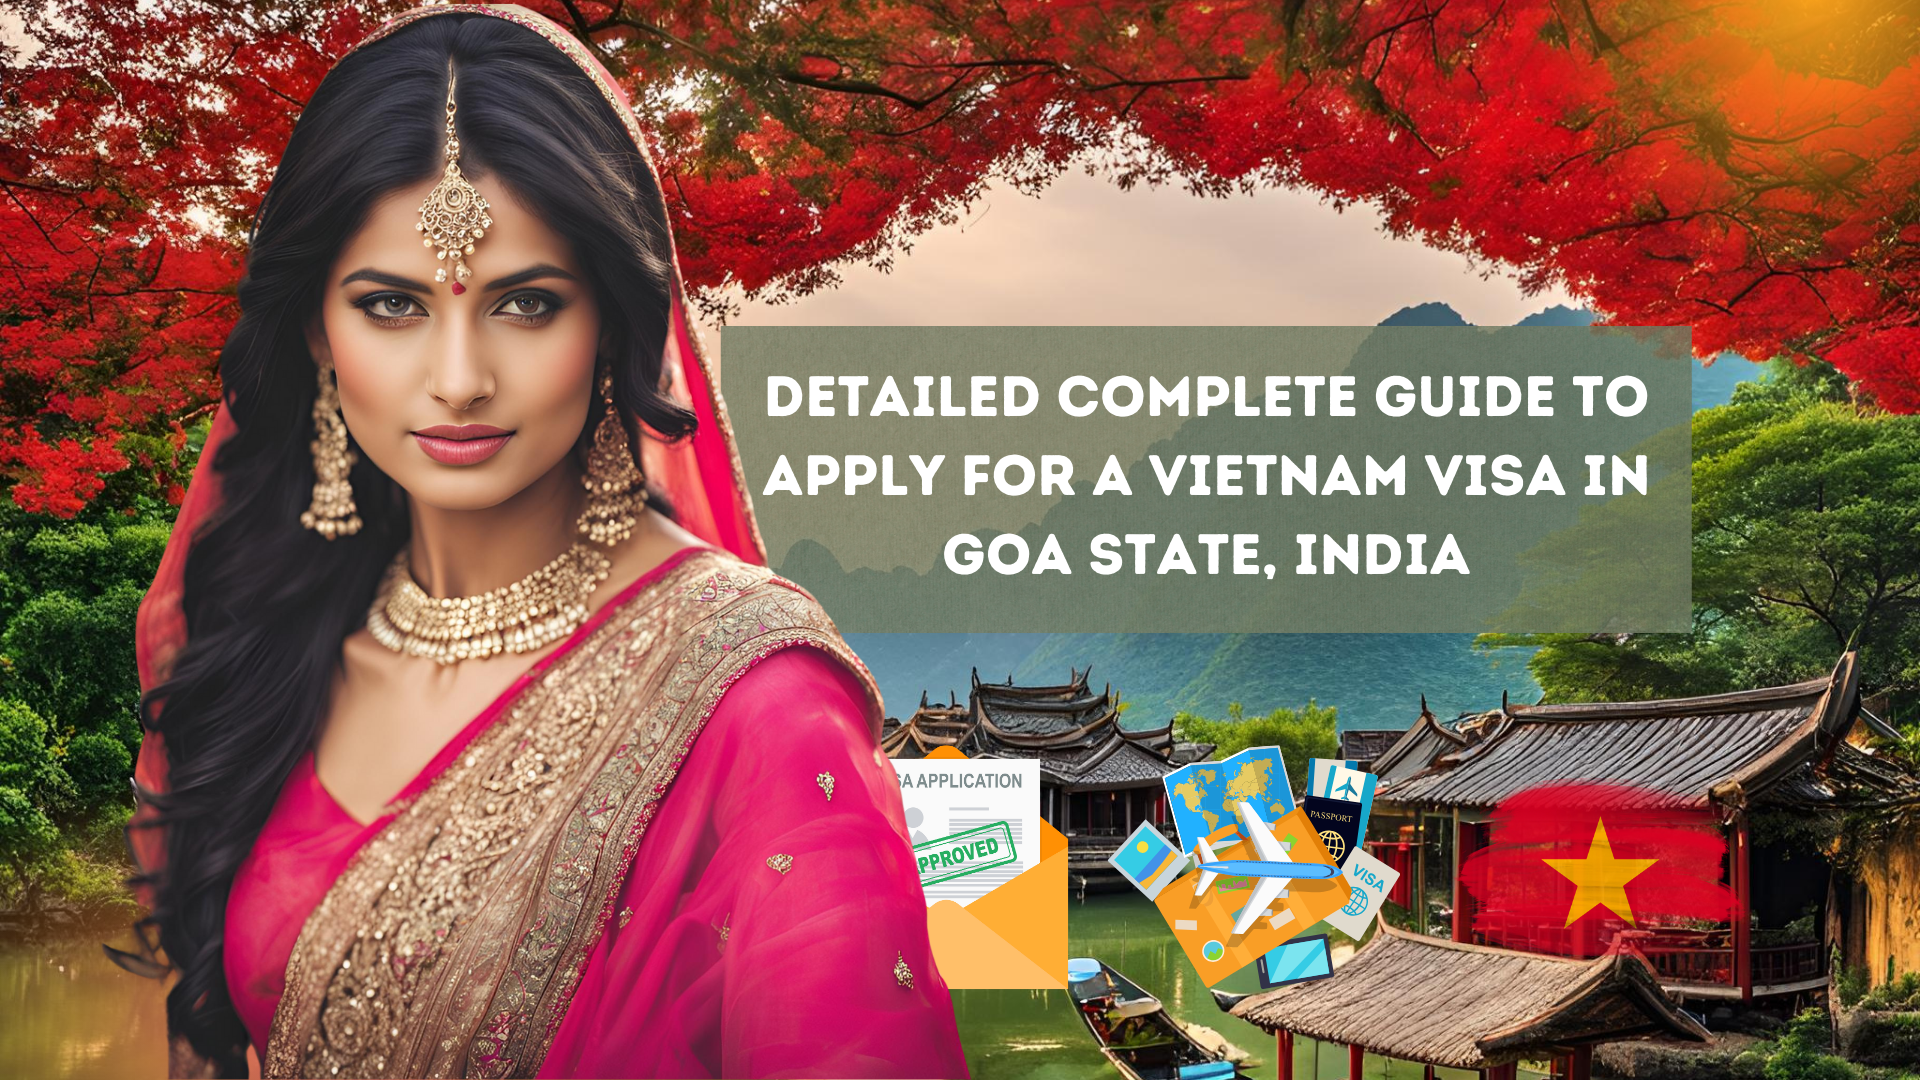 Detailed Complete Guide to Apply for a Vietnam Visa in Goa State, India